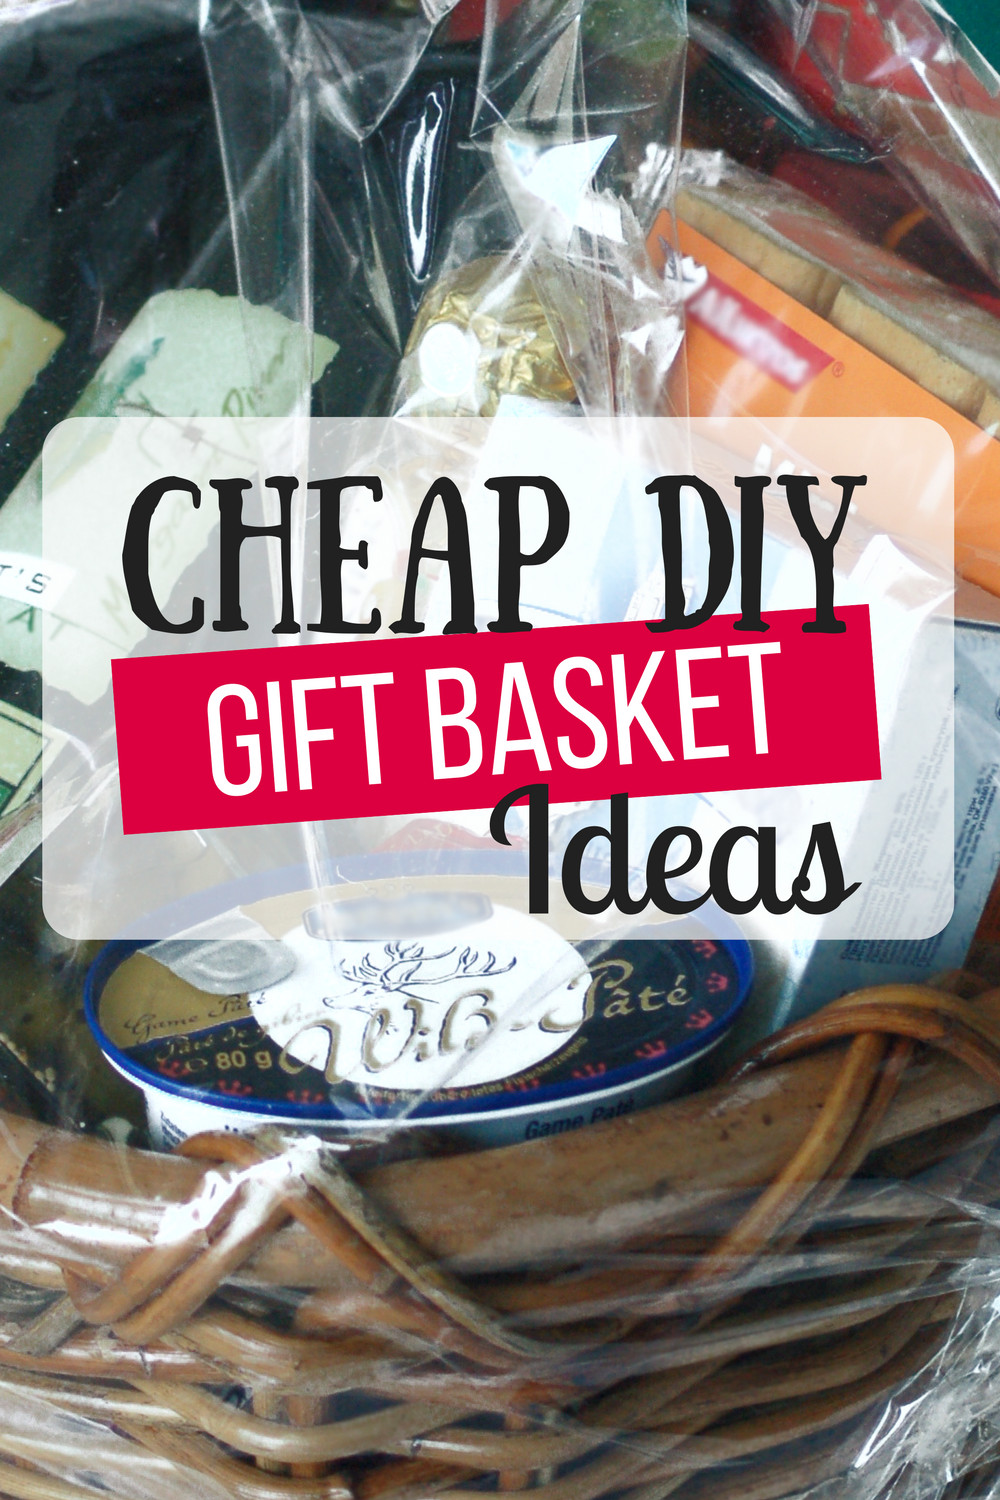 Small Gift Baskets Ideas
 Cheap DIY Gift Baskets The Busy Bud er